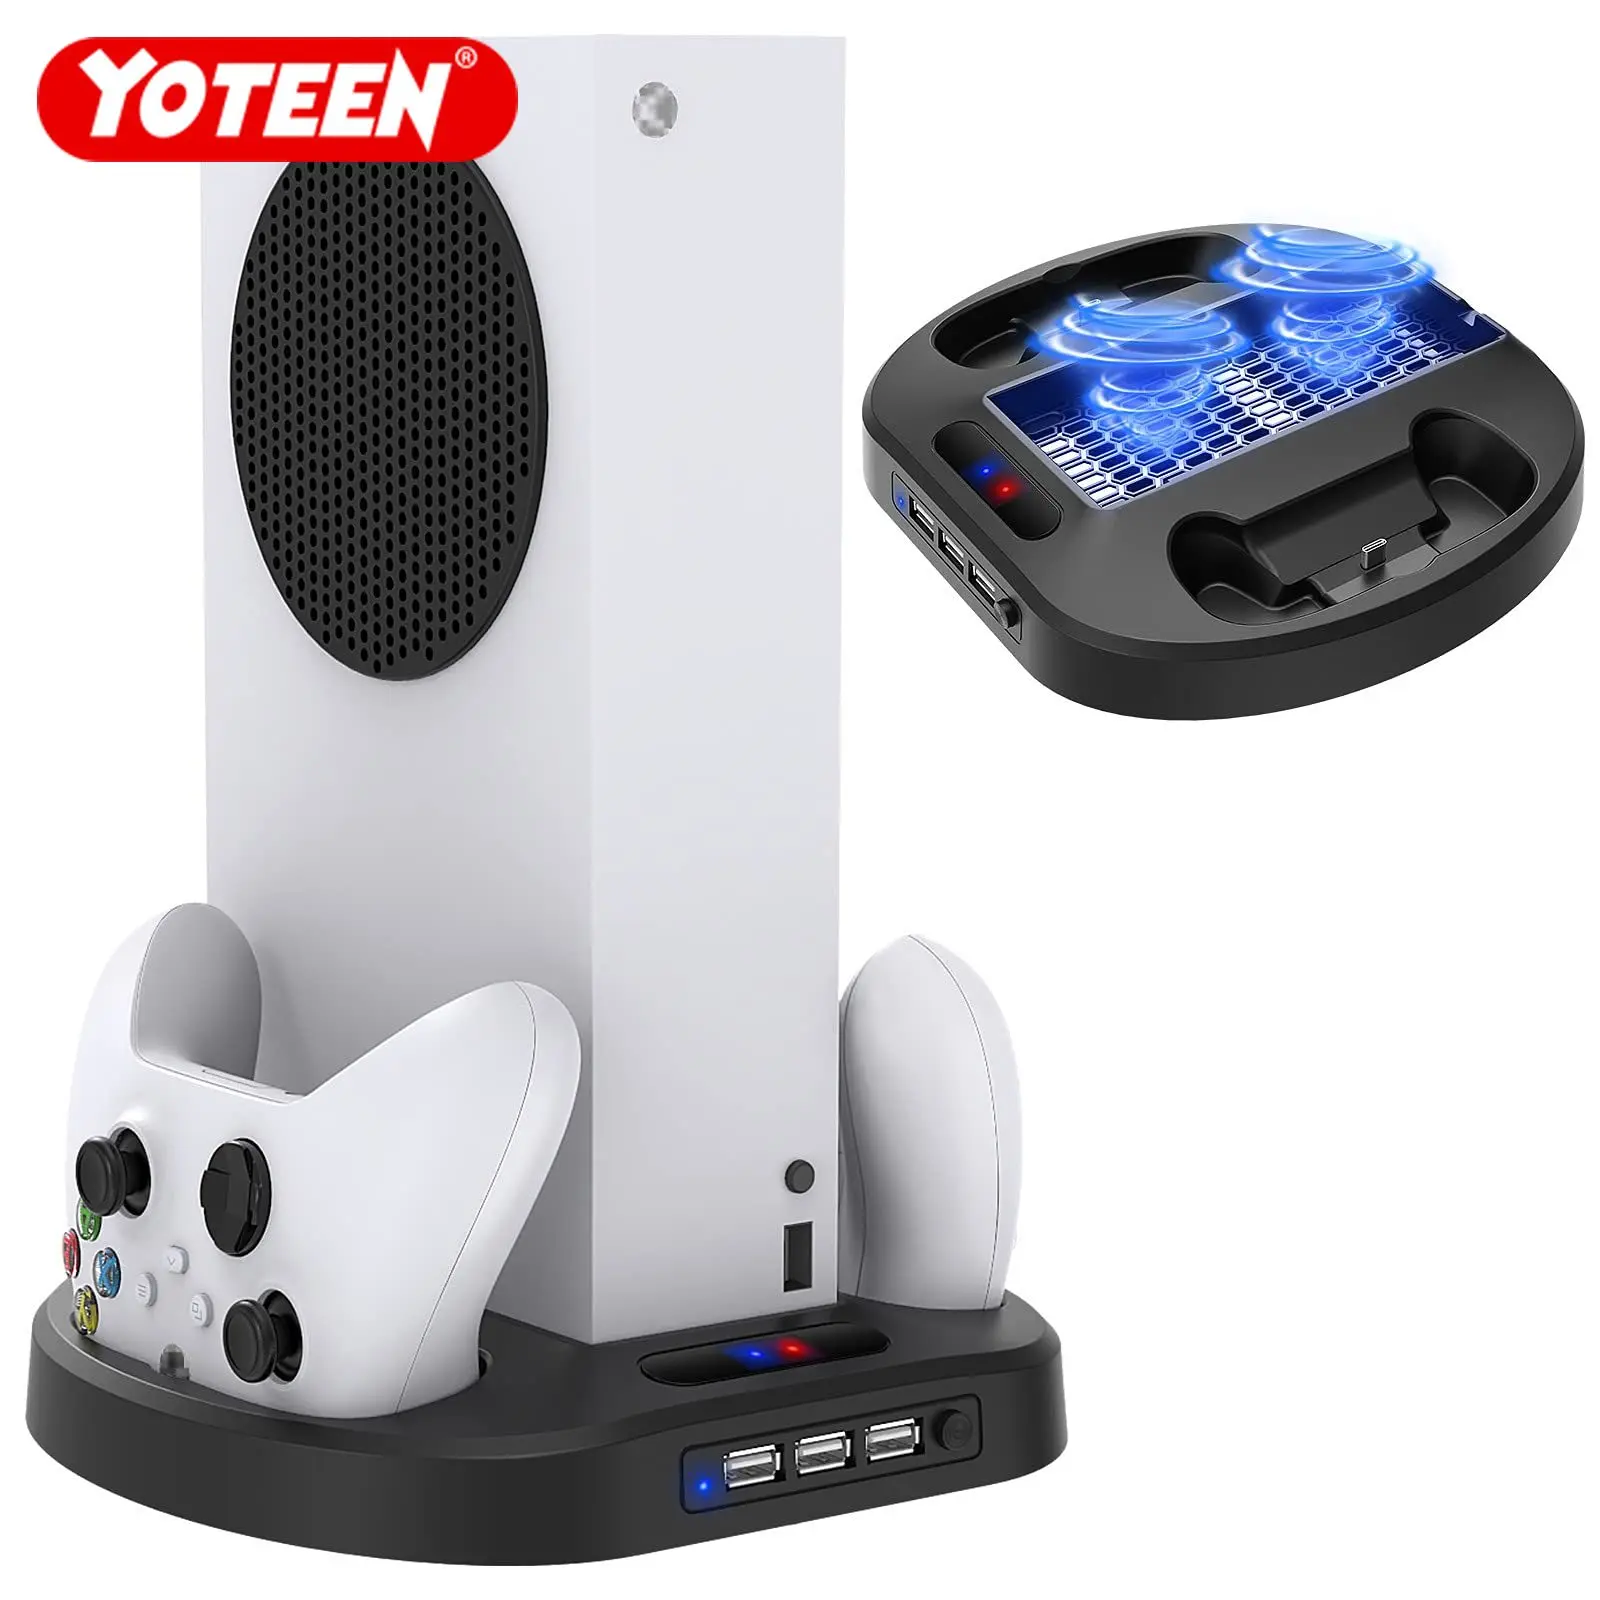 

Yoteen Vertical Charging Stand for Xbox Series S Controllers with Cooling Fan Charger Dock Station with LED Indicator 3 USB Hubs